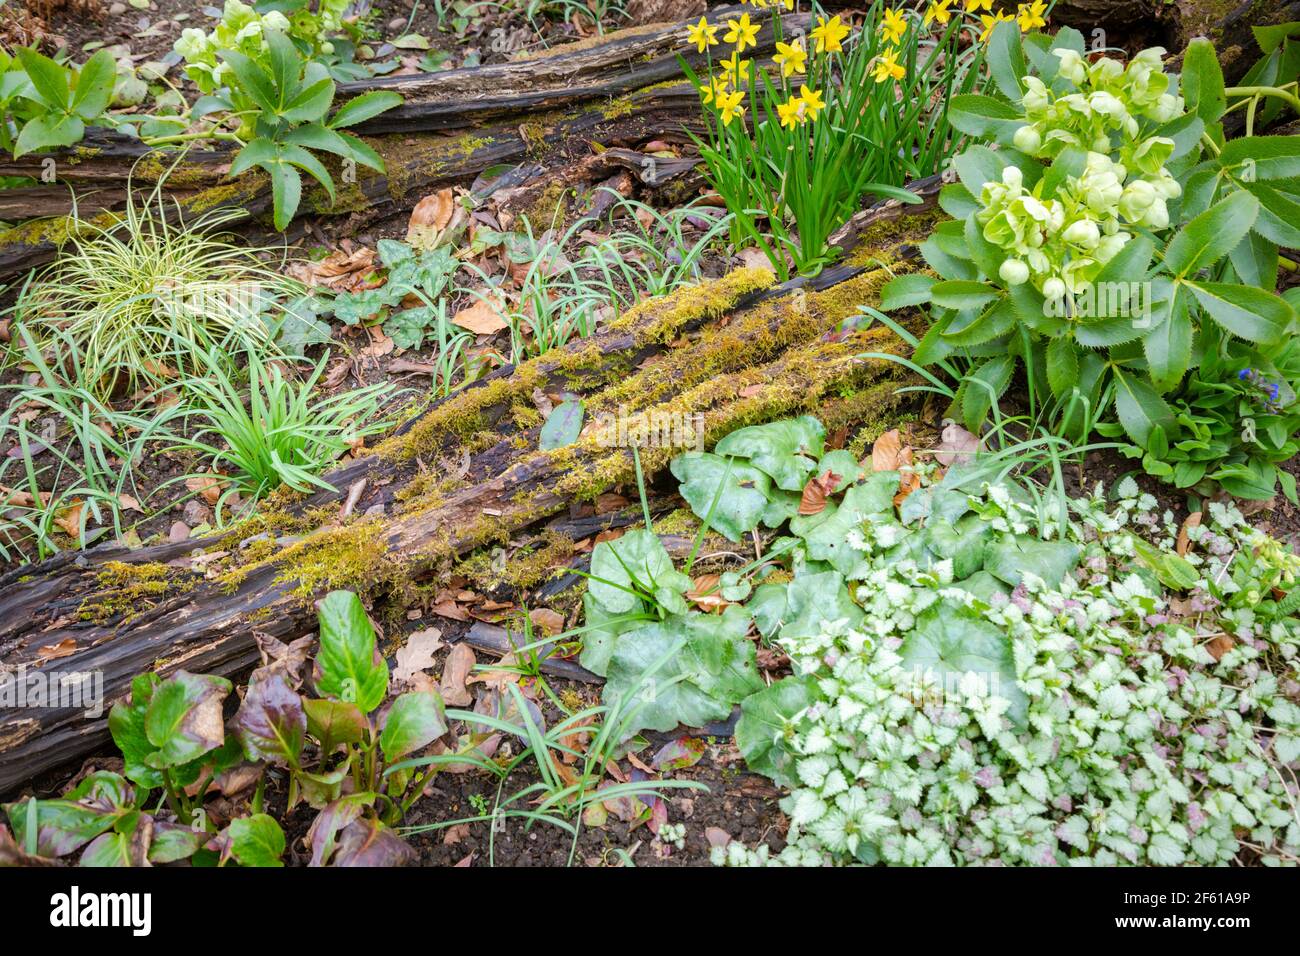 Old log in a garden bed to attract insects for biodiversity Stock Photo